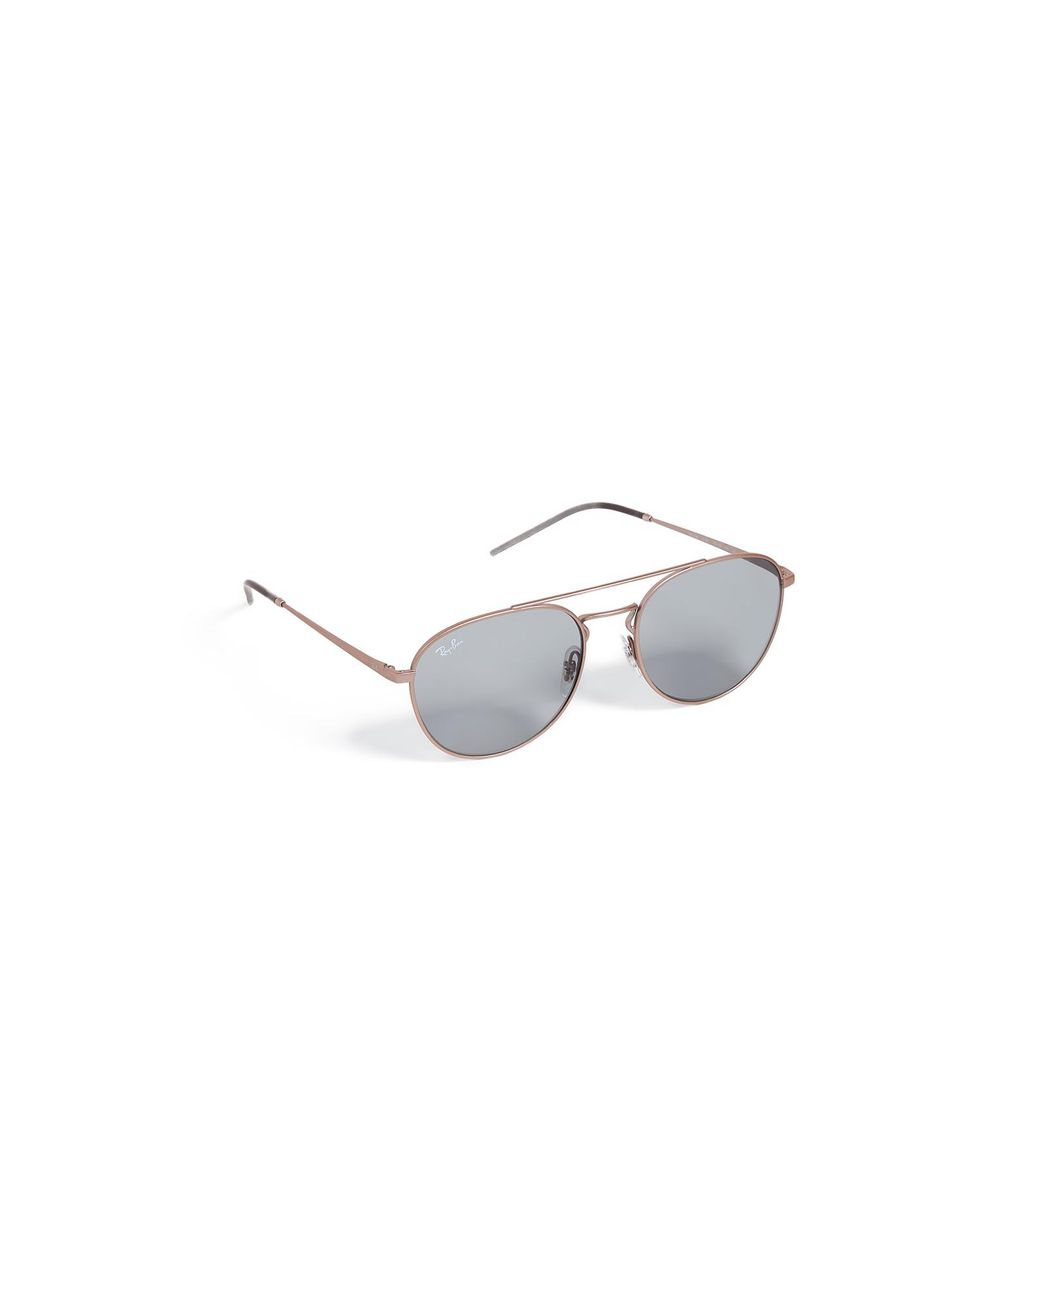 ray ban youngster aviator